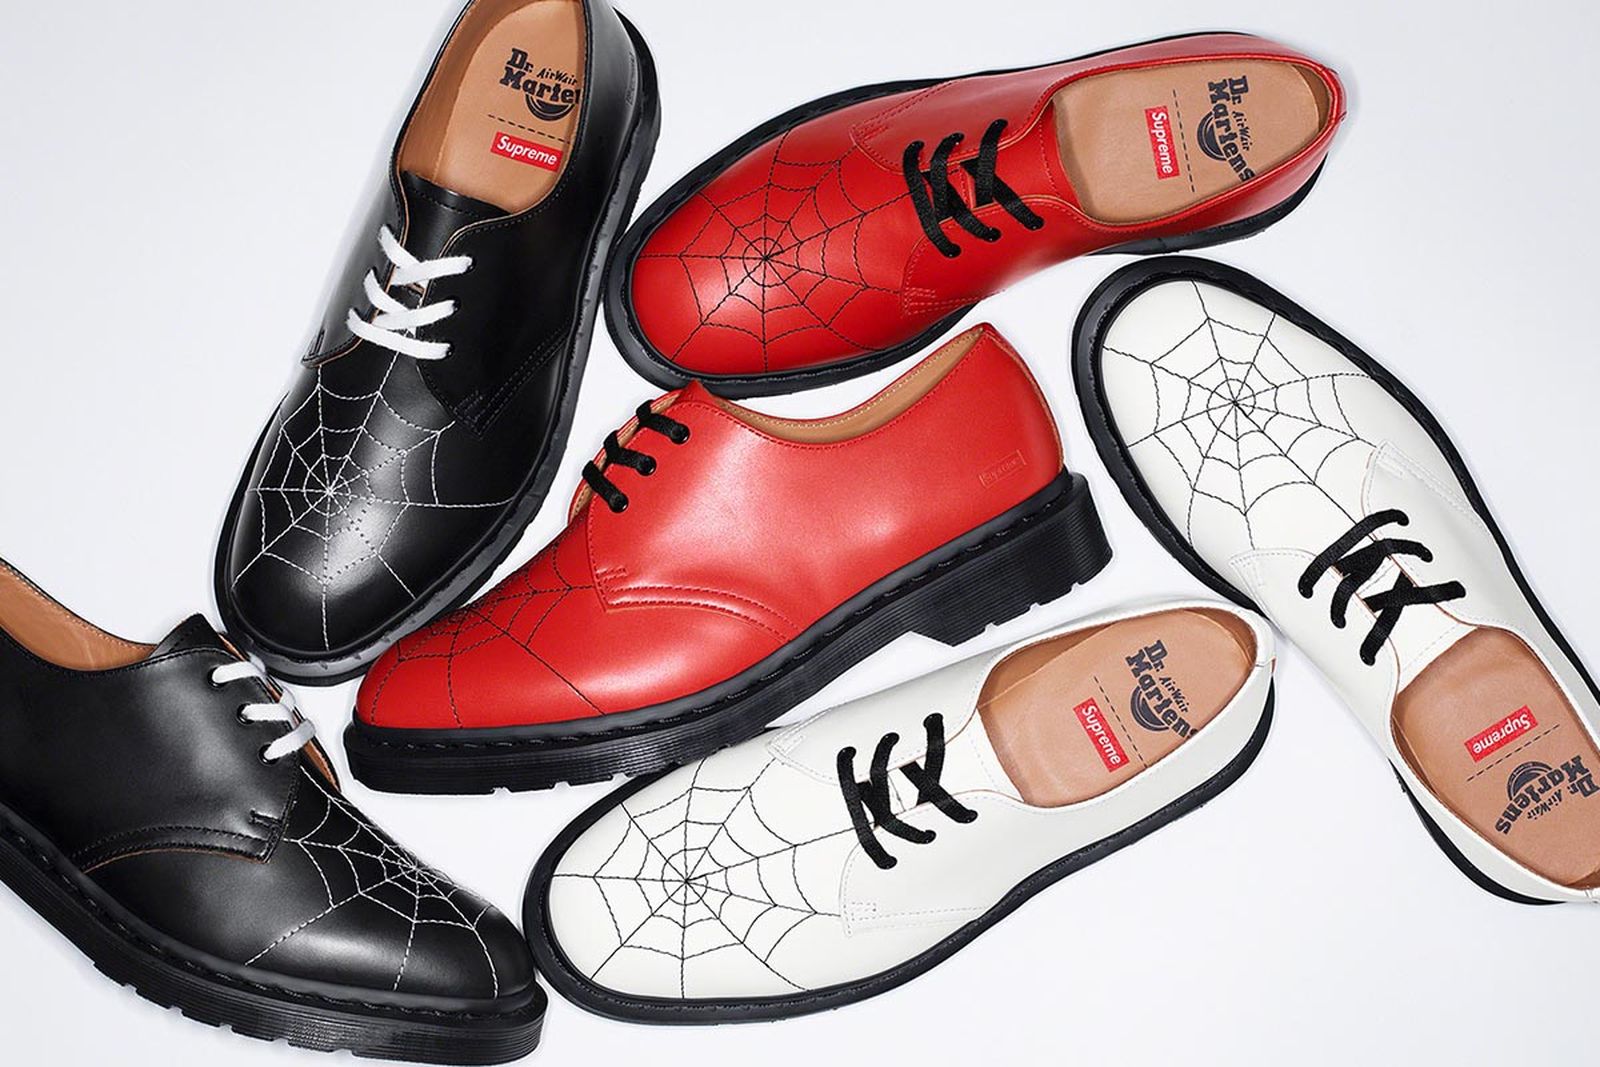 Supreme x Dr. Martens 1461 Collection: Release Information